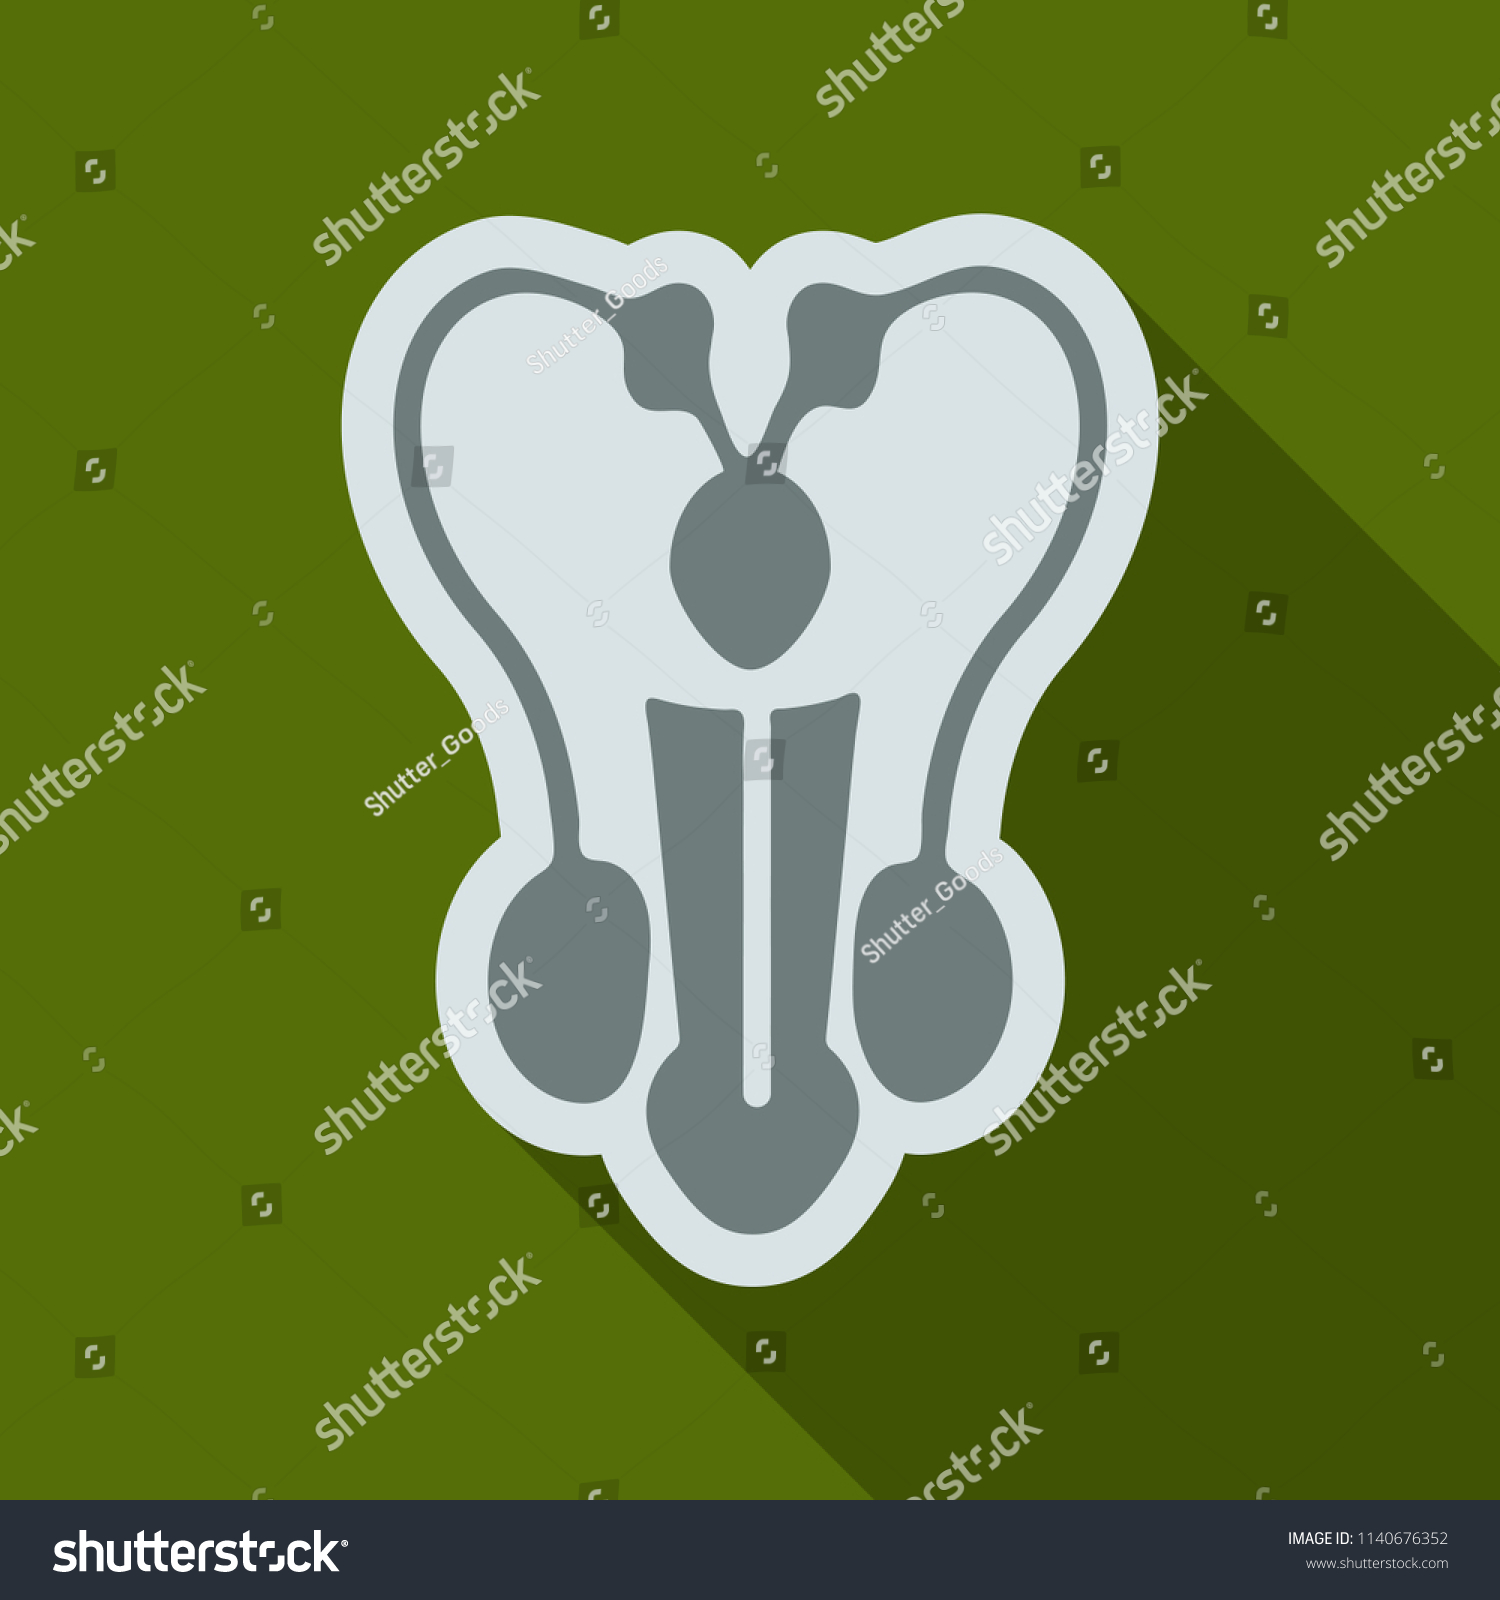 Male Reproductive System Icon Cartoon Style Stock Vector Royalty Free 1140676352 Shutterstock 3135